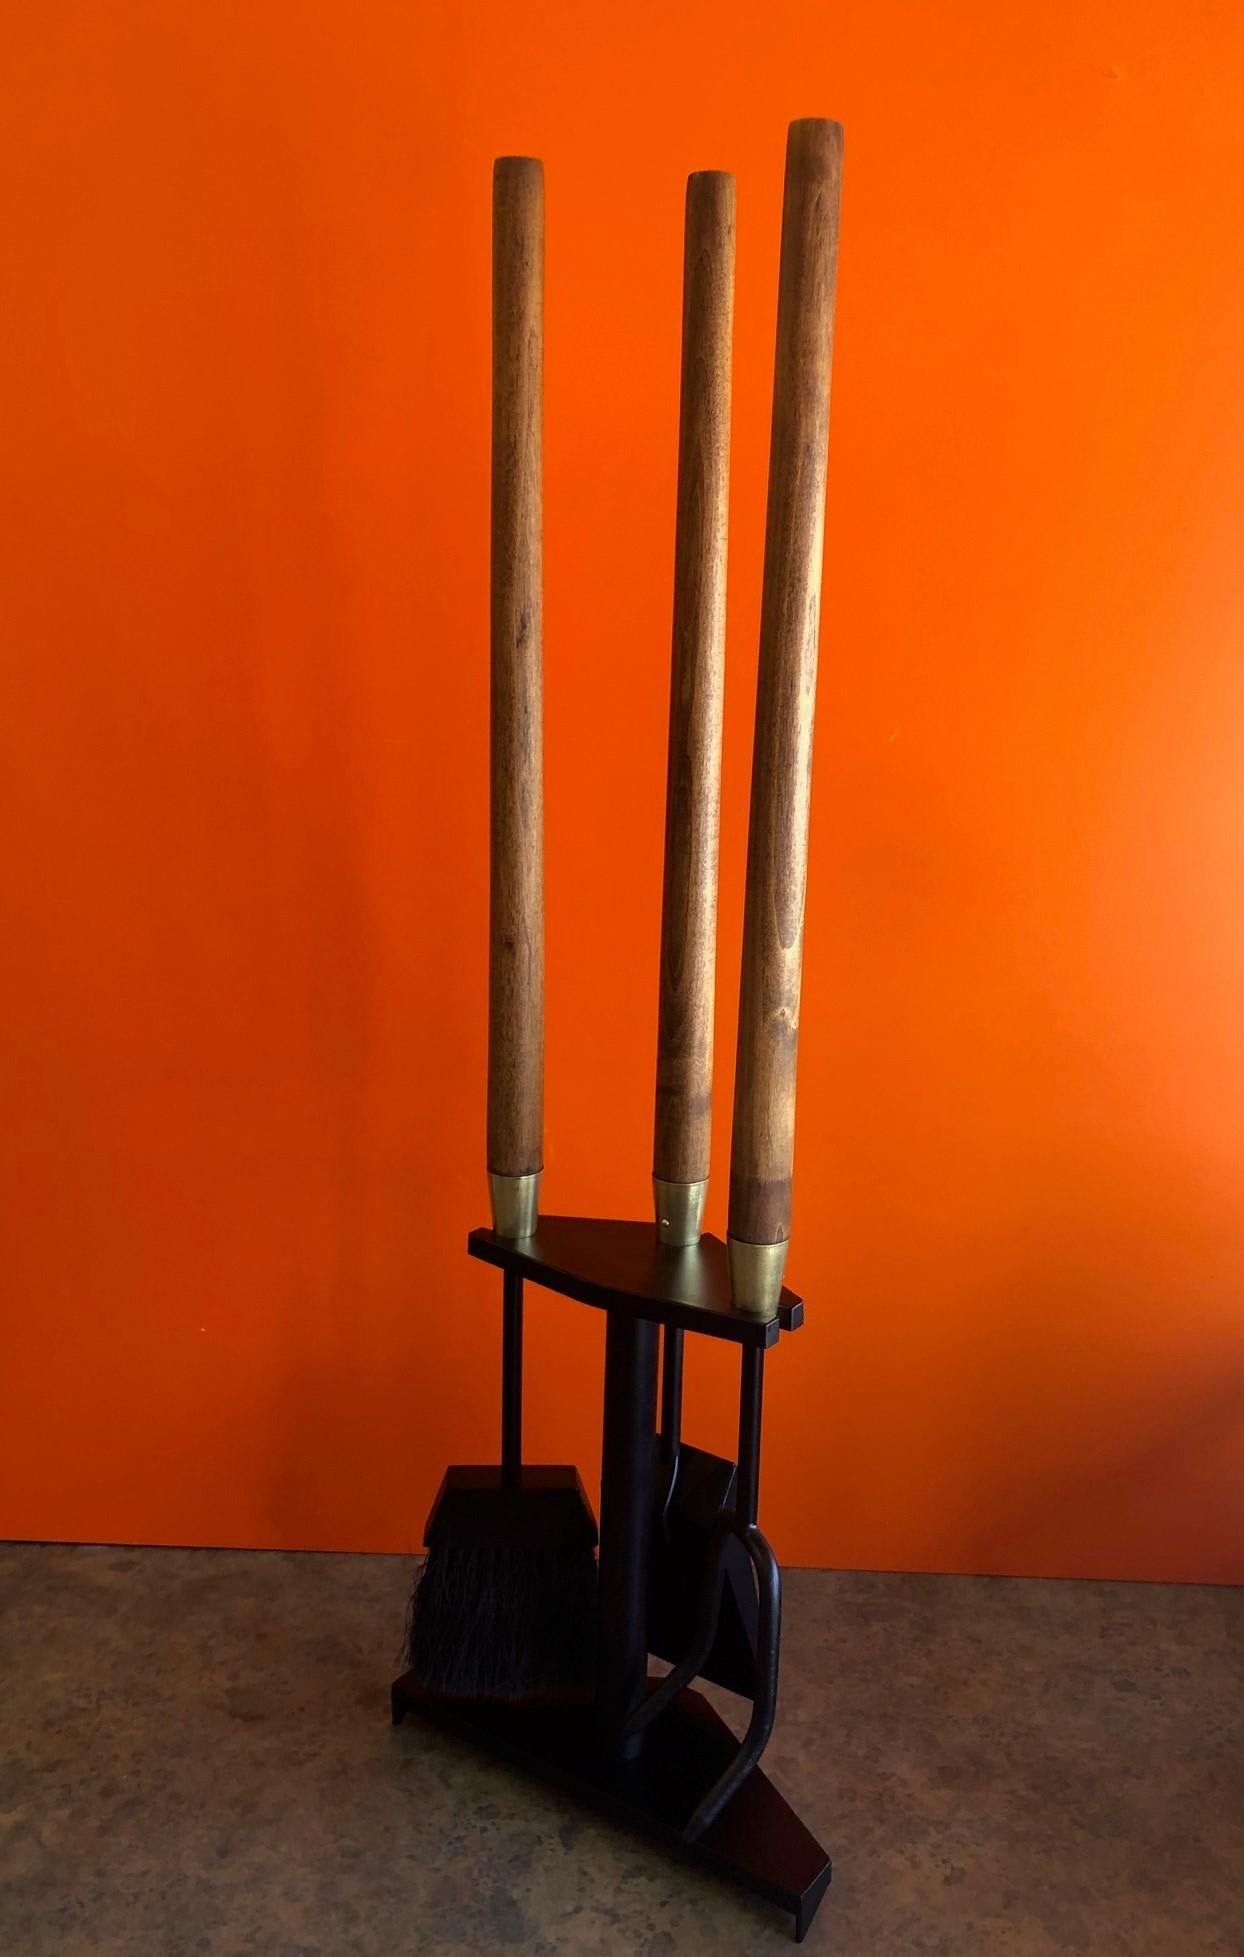 Modernist set of fire place tools in cast iron with brass fittings and walnut handles by Seymour Mfg. of Indiana, circa 1960s. There are three tools (shovel, brush and poker) and a triangular stand in excellent refinished condition. The set measures